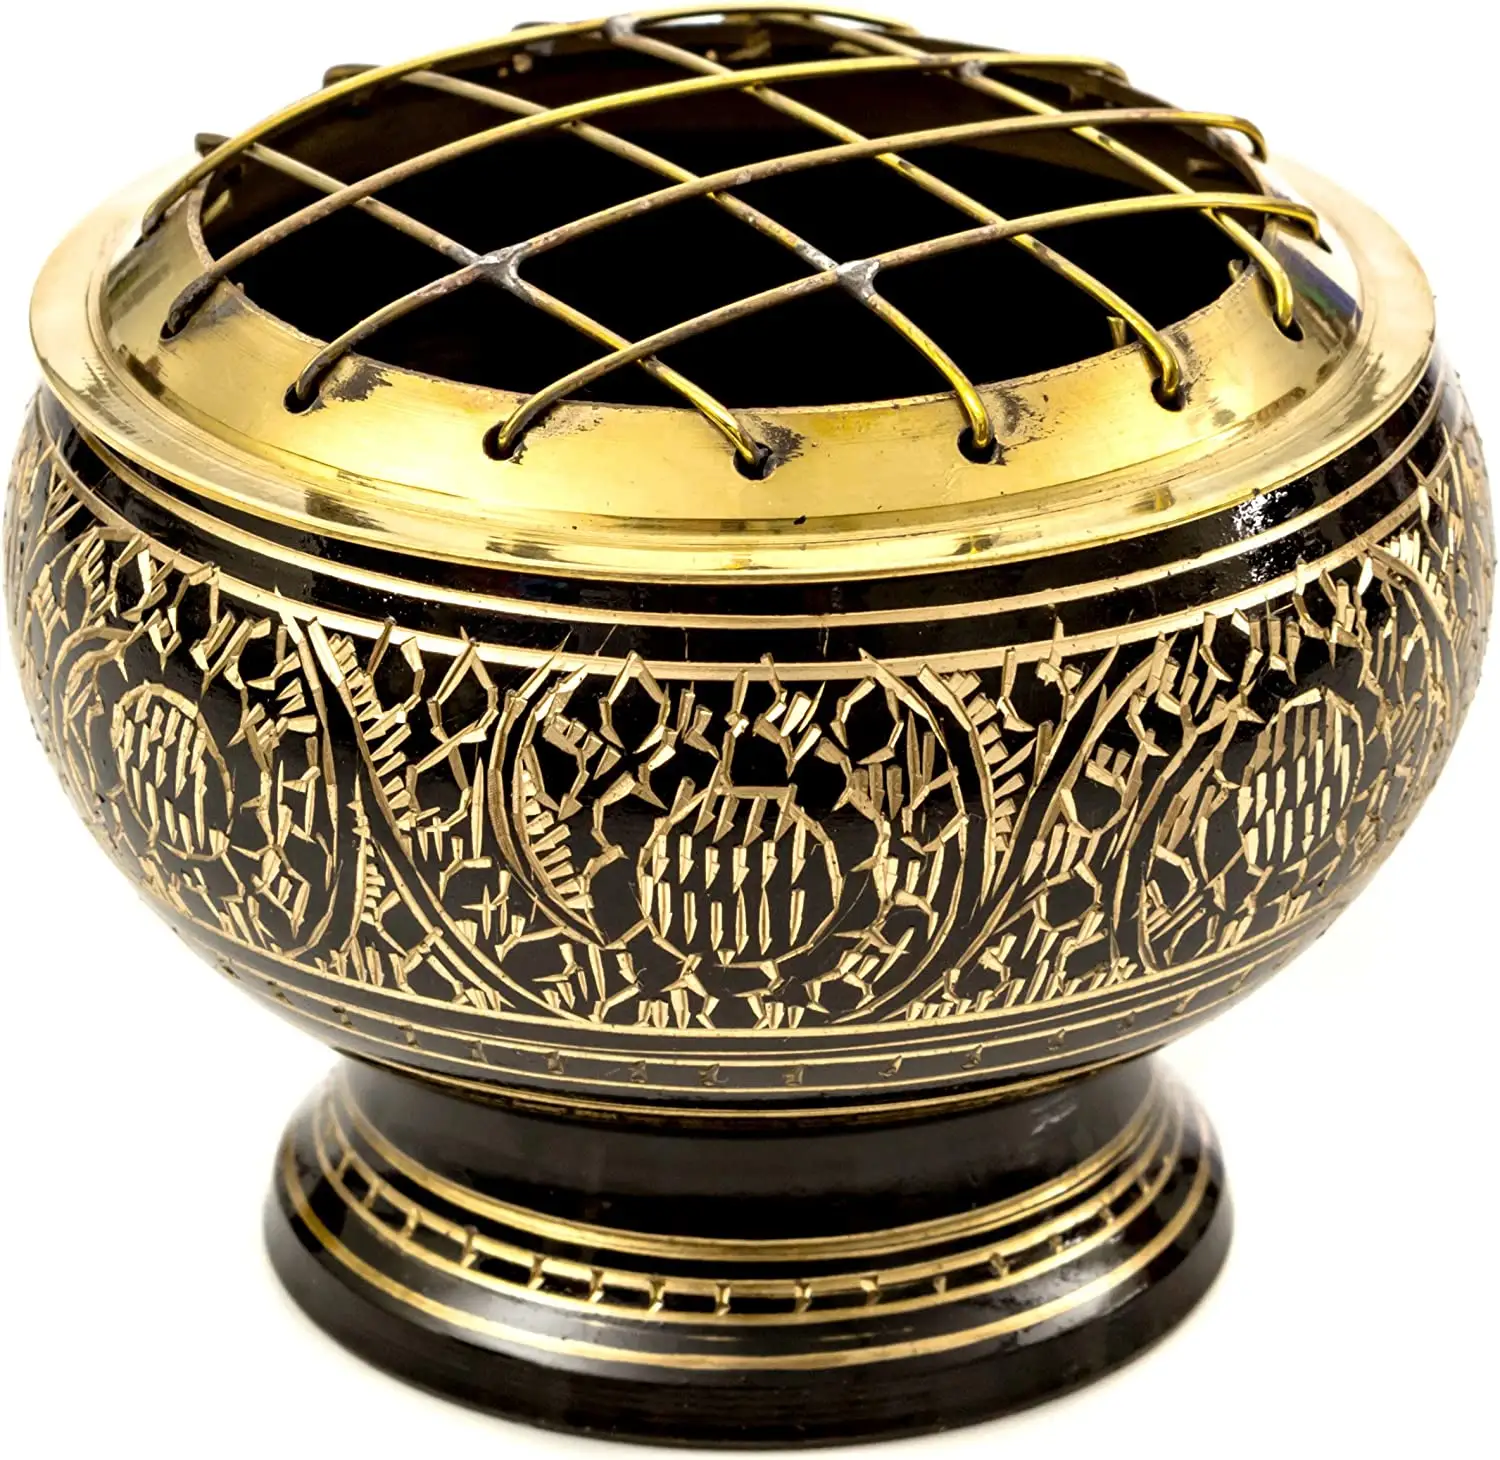 Solid Black Brass Screen Burner with Artistic Carving and Wooden Coaster